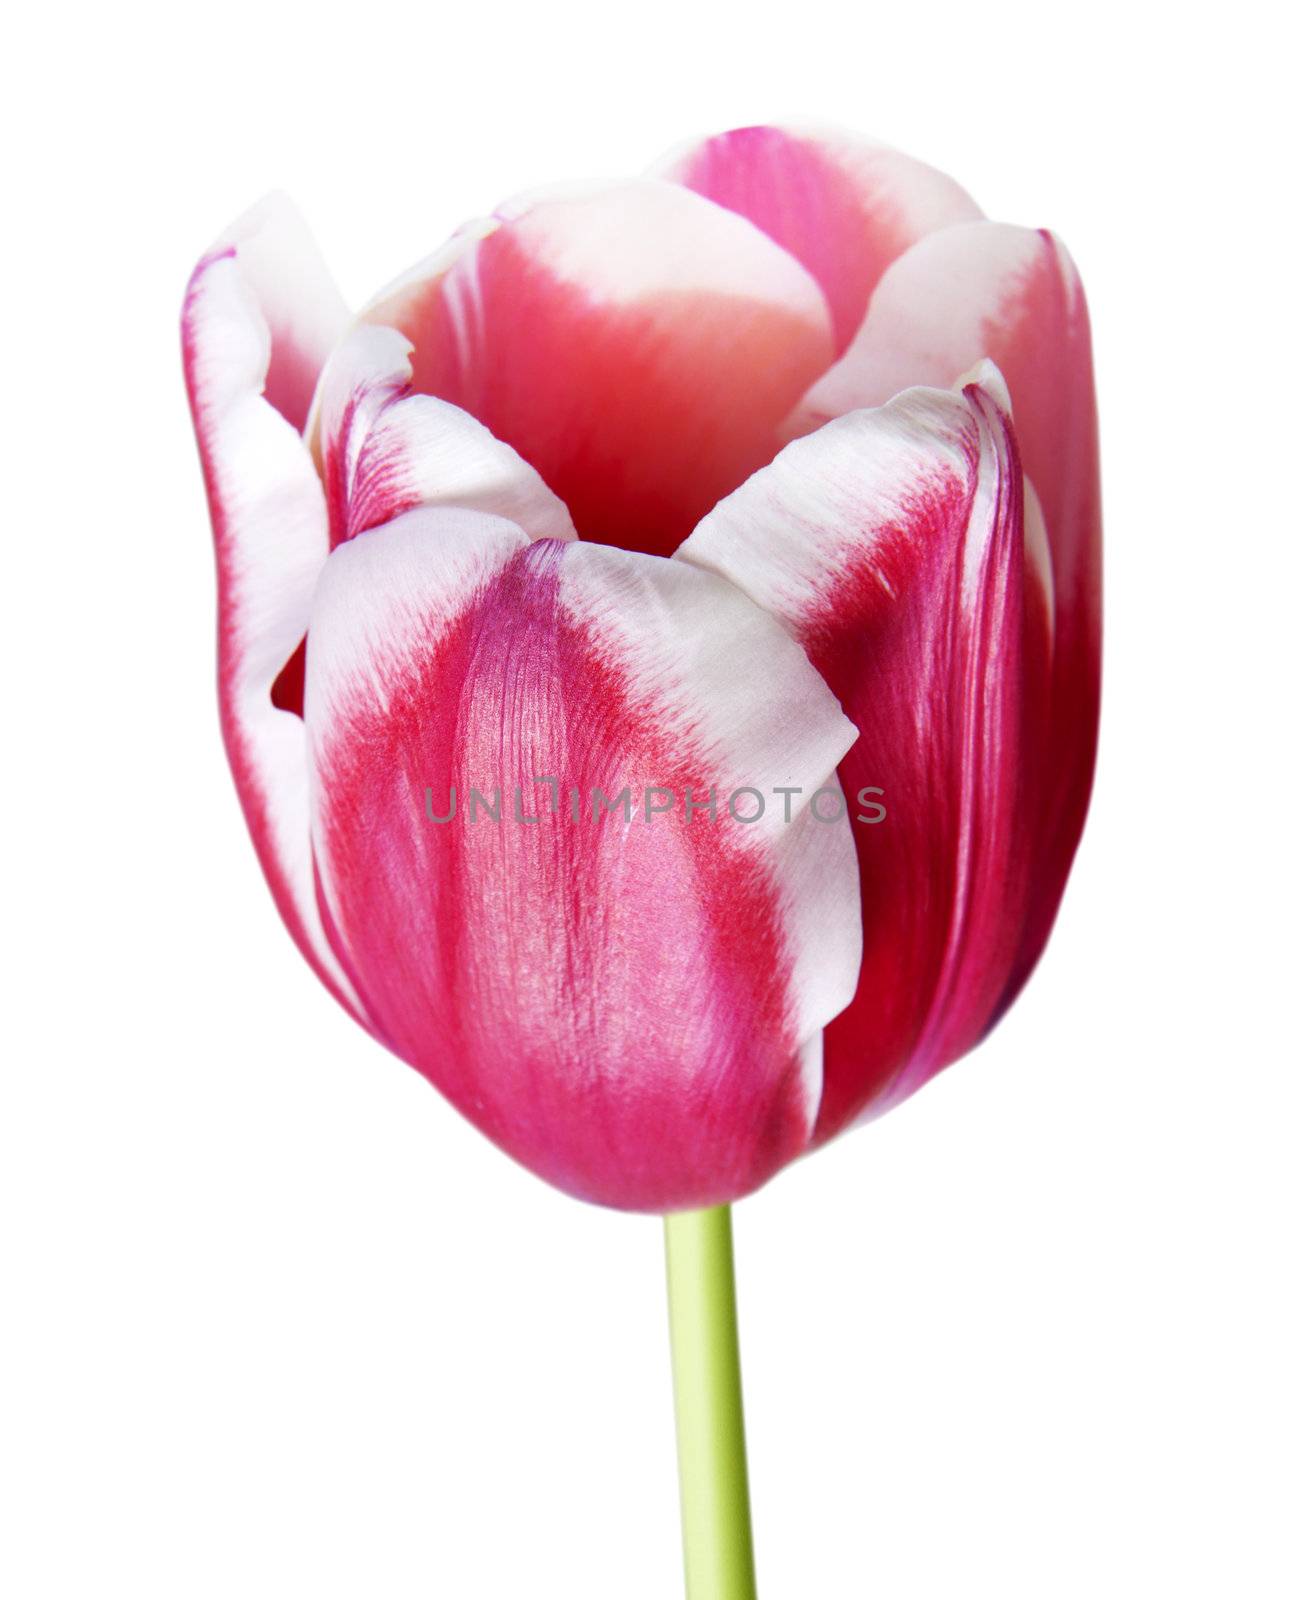 Petals of pink tulip by ssuaphoto